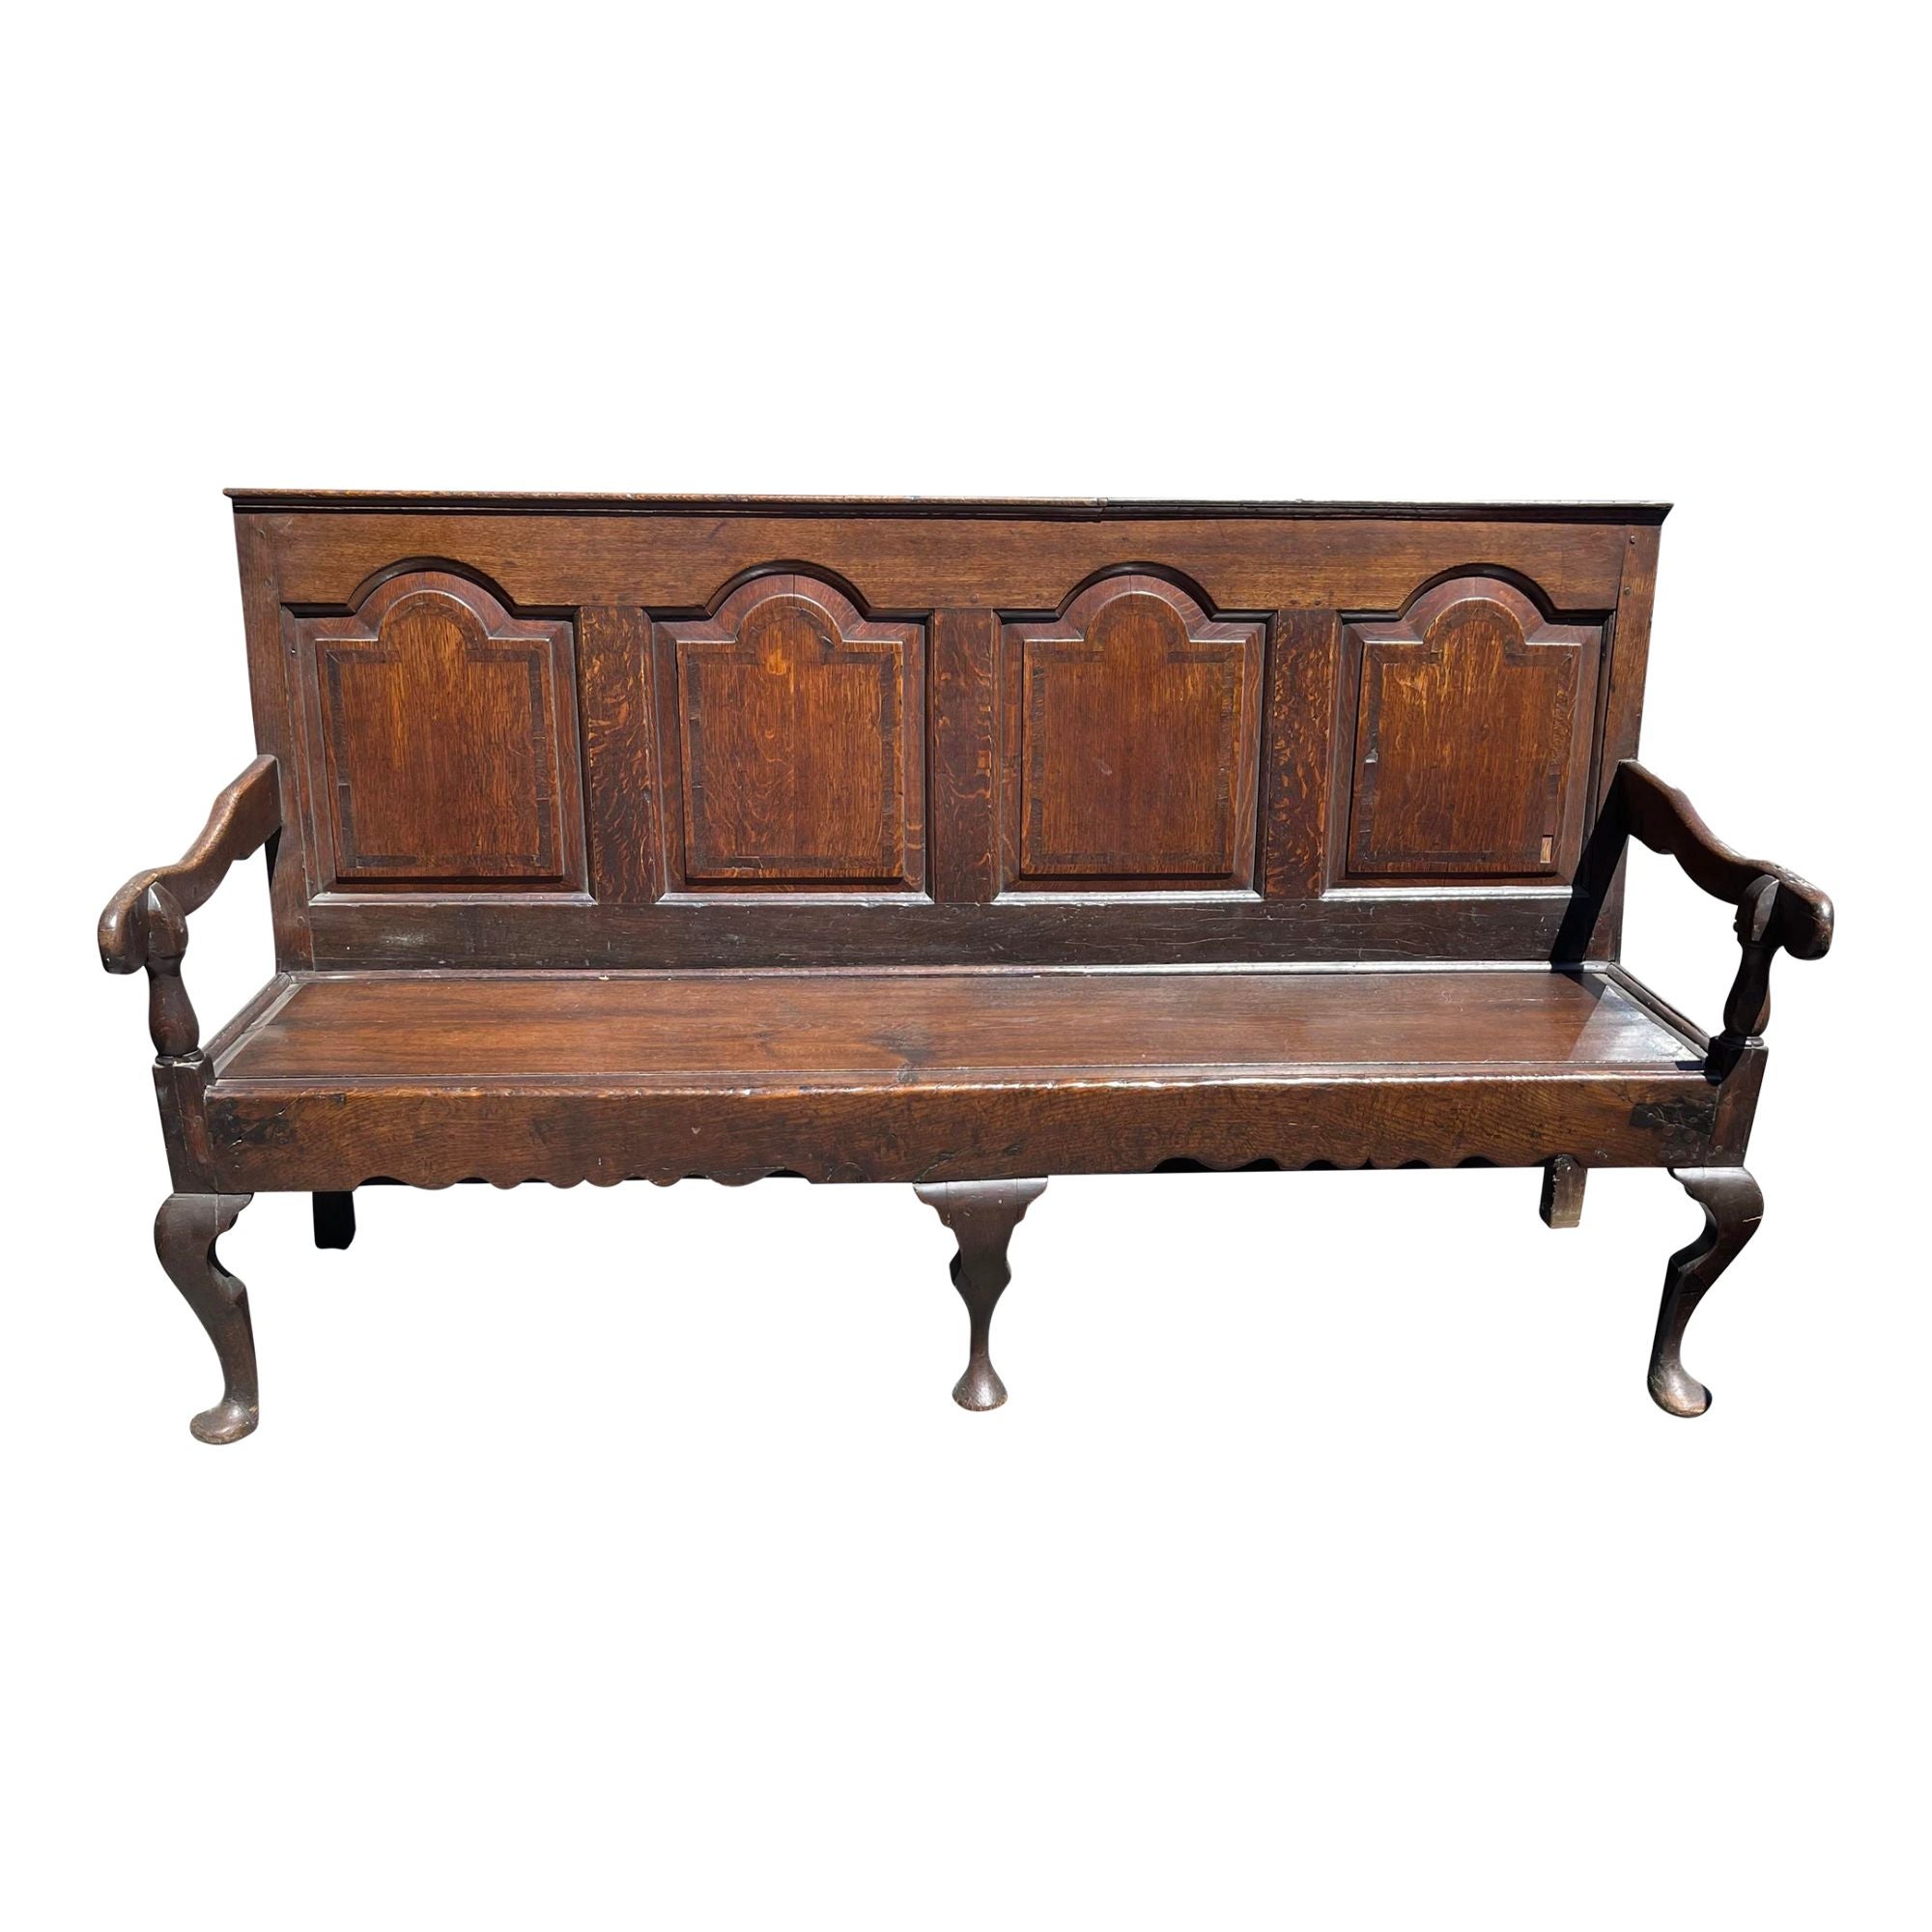 Antique 18th Century George III Oak Settle Hall Bench For Sale